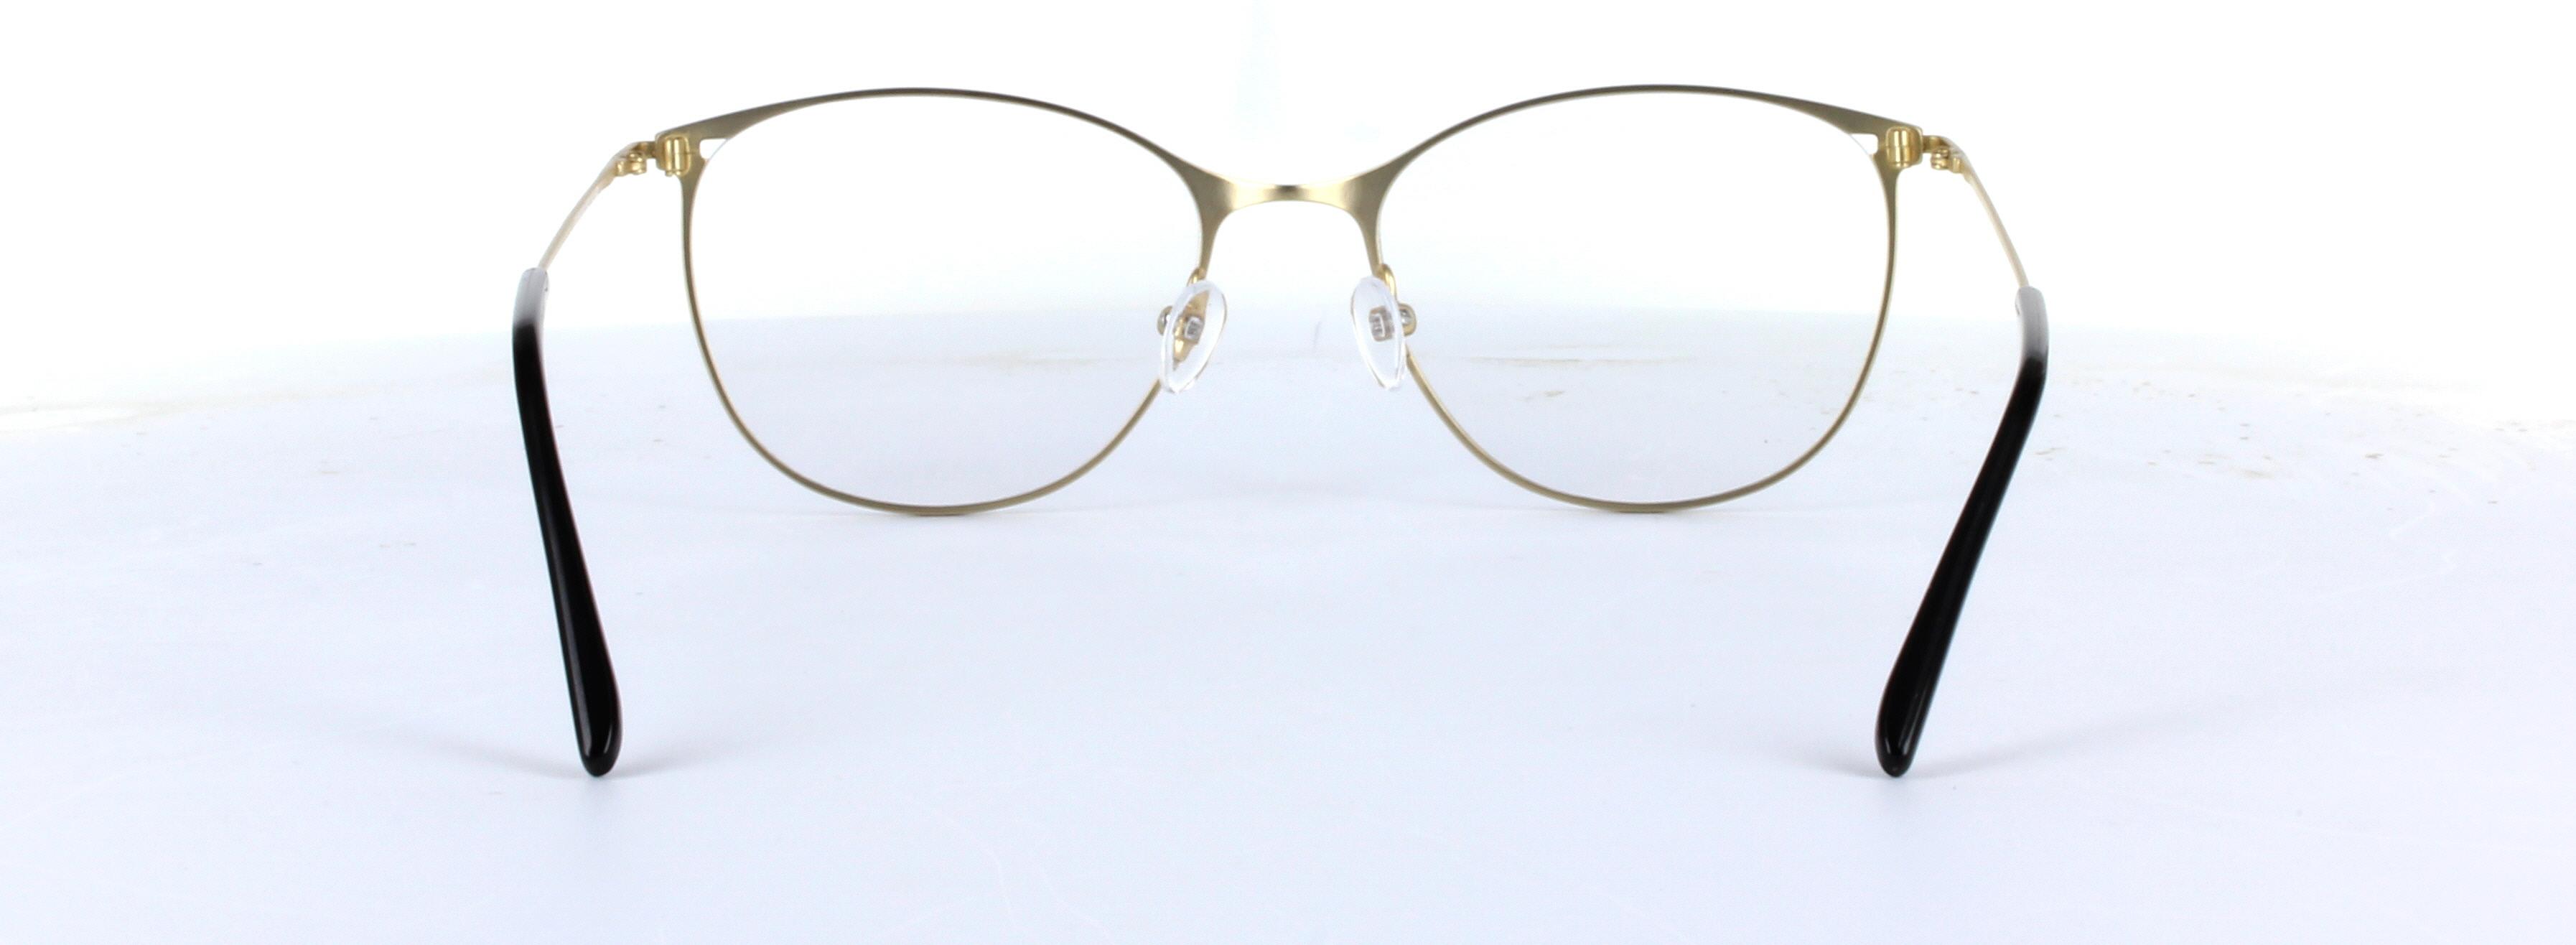 Monroe Turquoise Full Rim Oval Round Metal Glasses - Image View 3